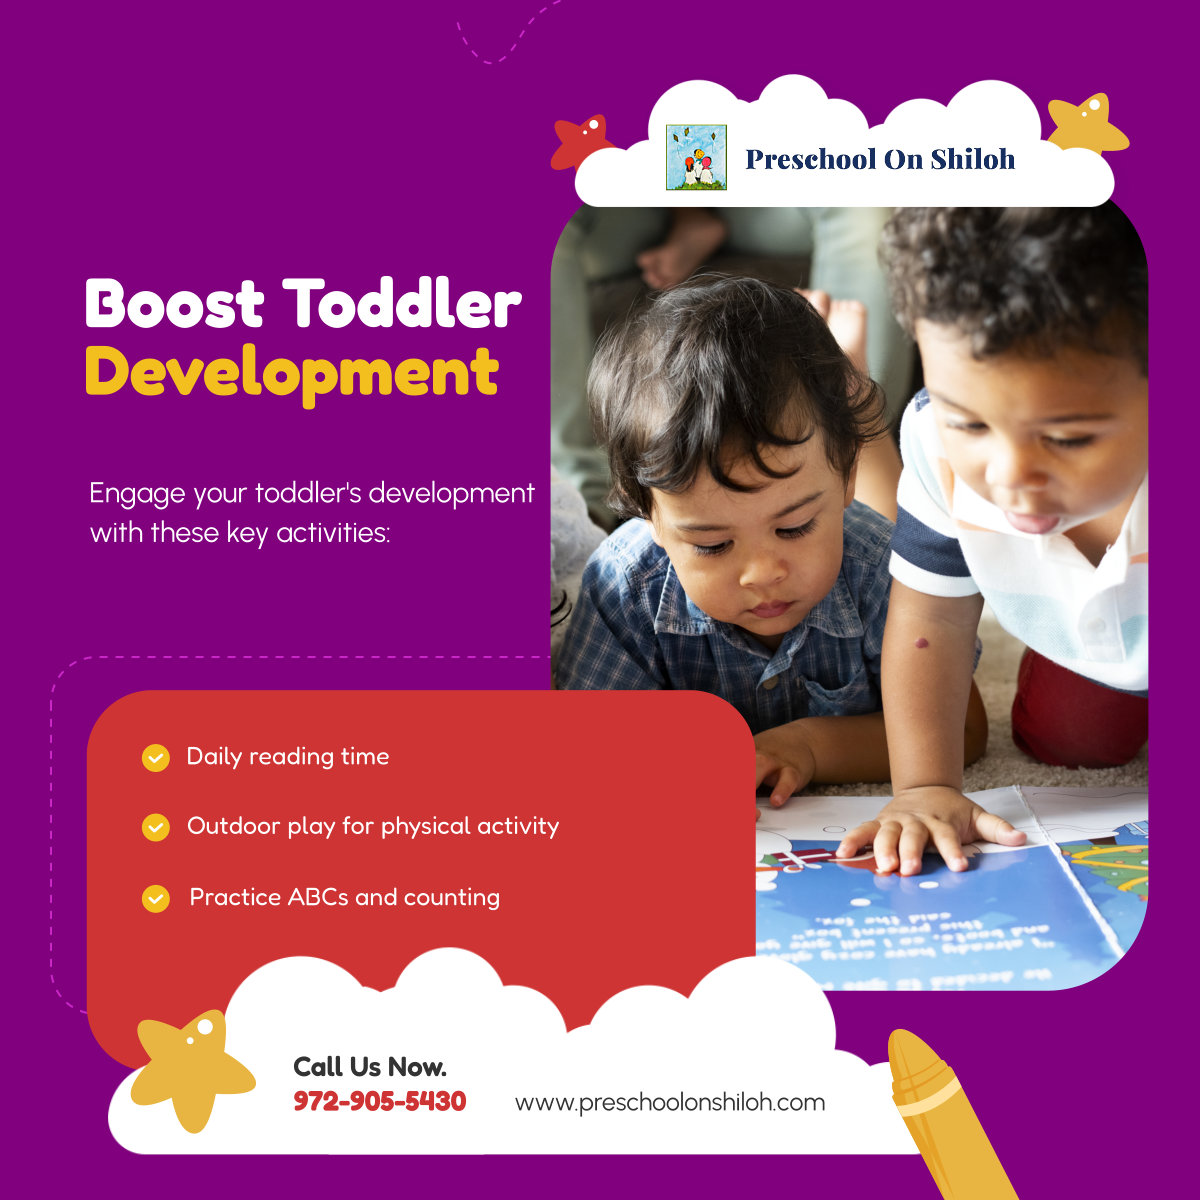 Maximize your toddler's potential with these simple yet effective activities. Start today for a brighter tomorrow! 

#GarlandTX #ChildCare #ToddlerDevelopment